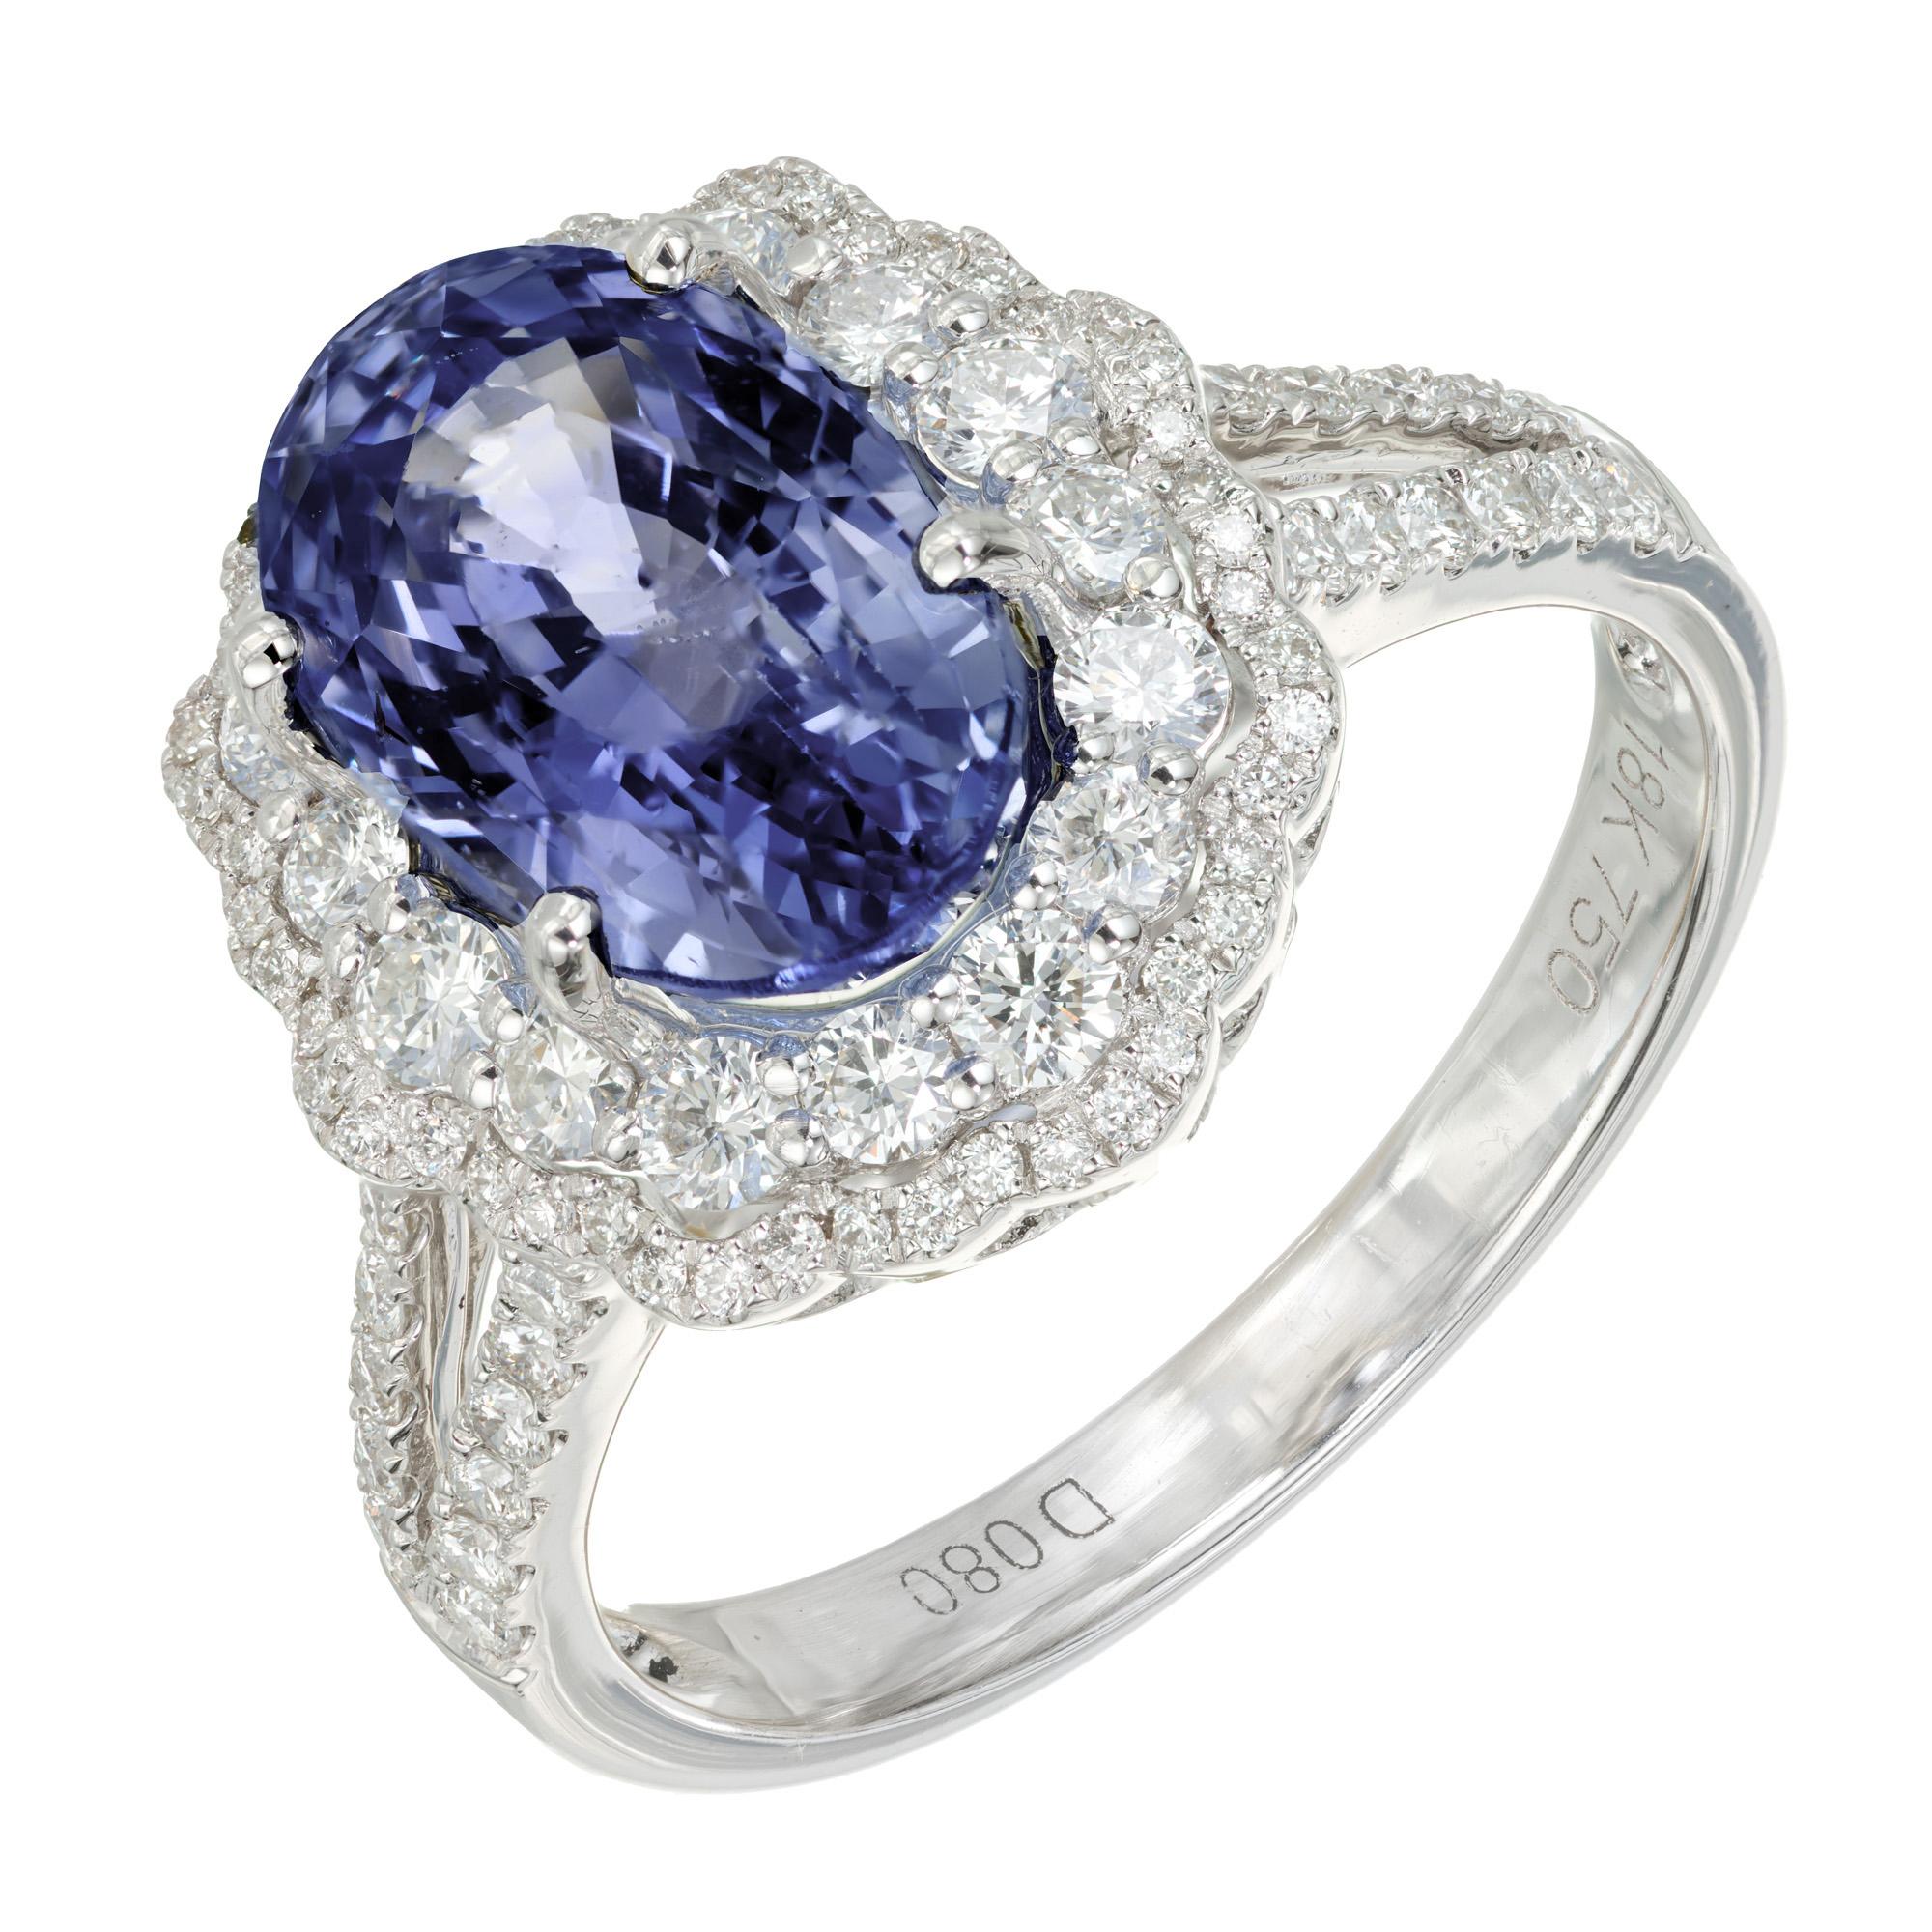 Periwinkle blue sapphire and diamond engagement ring. GIA certified natural, untreated oval center 4.55ct sapphire with a double halo of round brilliant cut diamonds. 18k white gold split shank setting accented with round brilliant cut diamonds. The